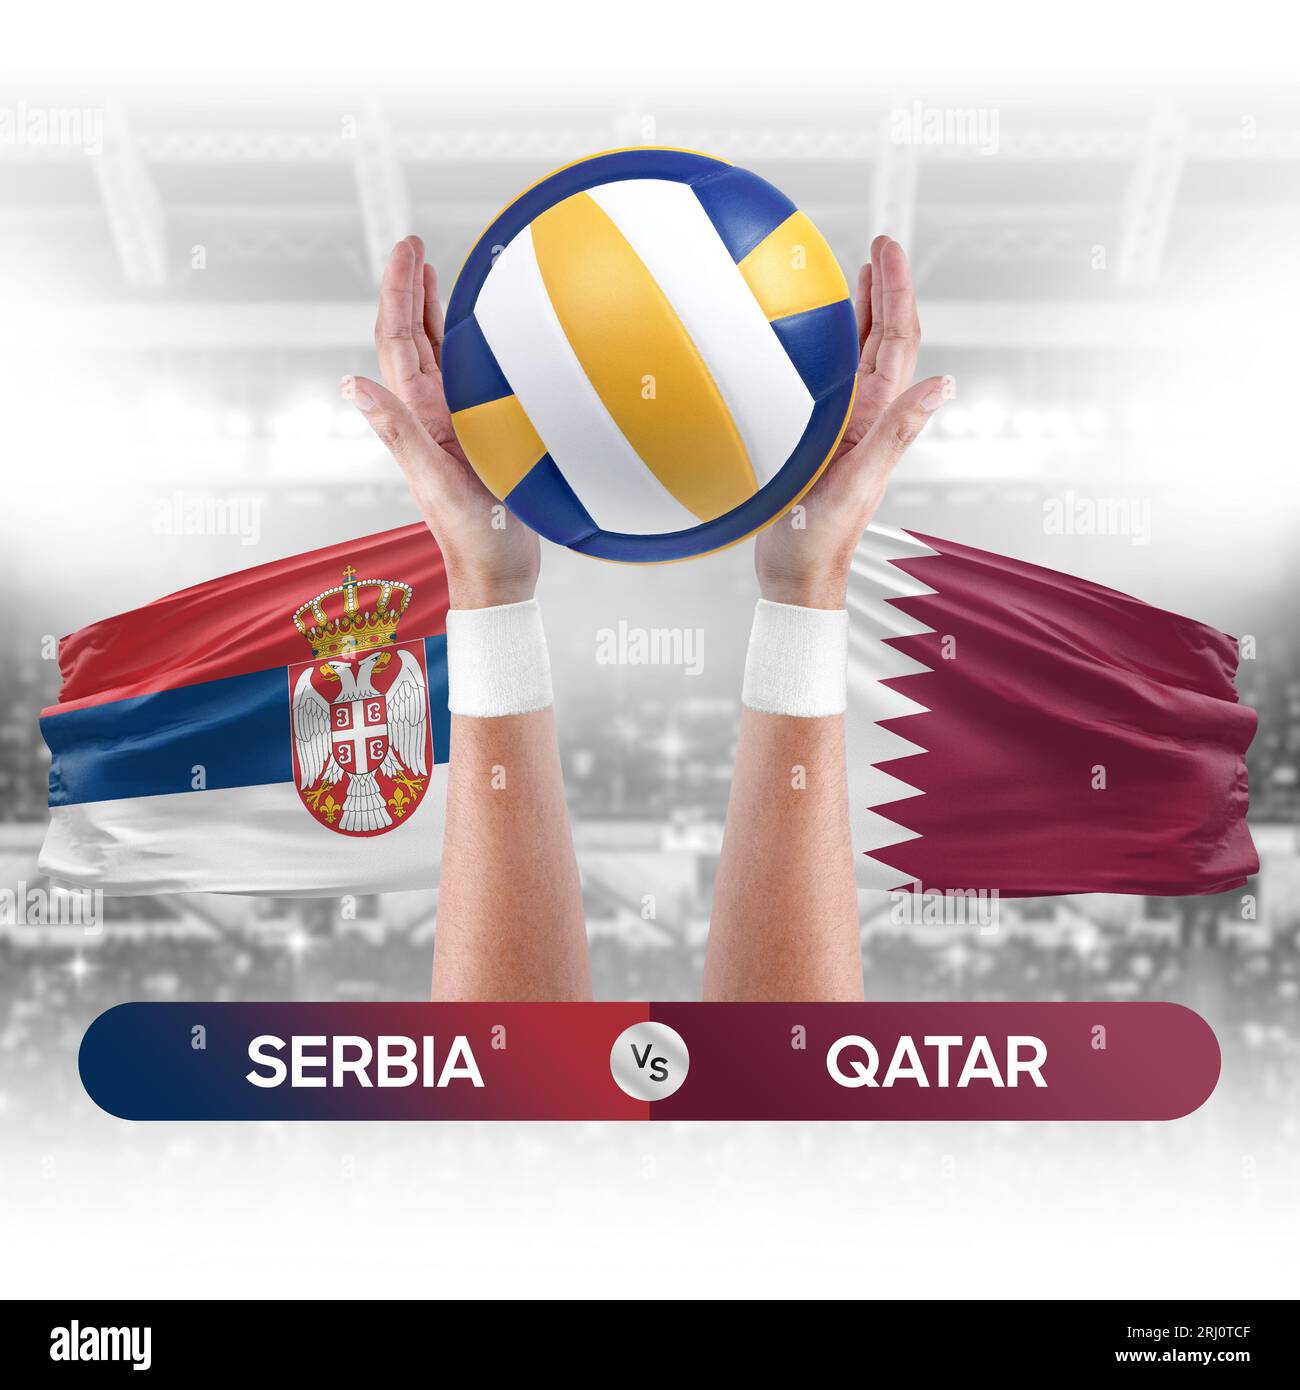 Serbia vs Qatar national teams volleyball volley ball match competition concept. Stock Photo